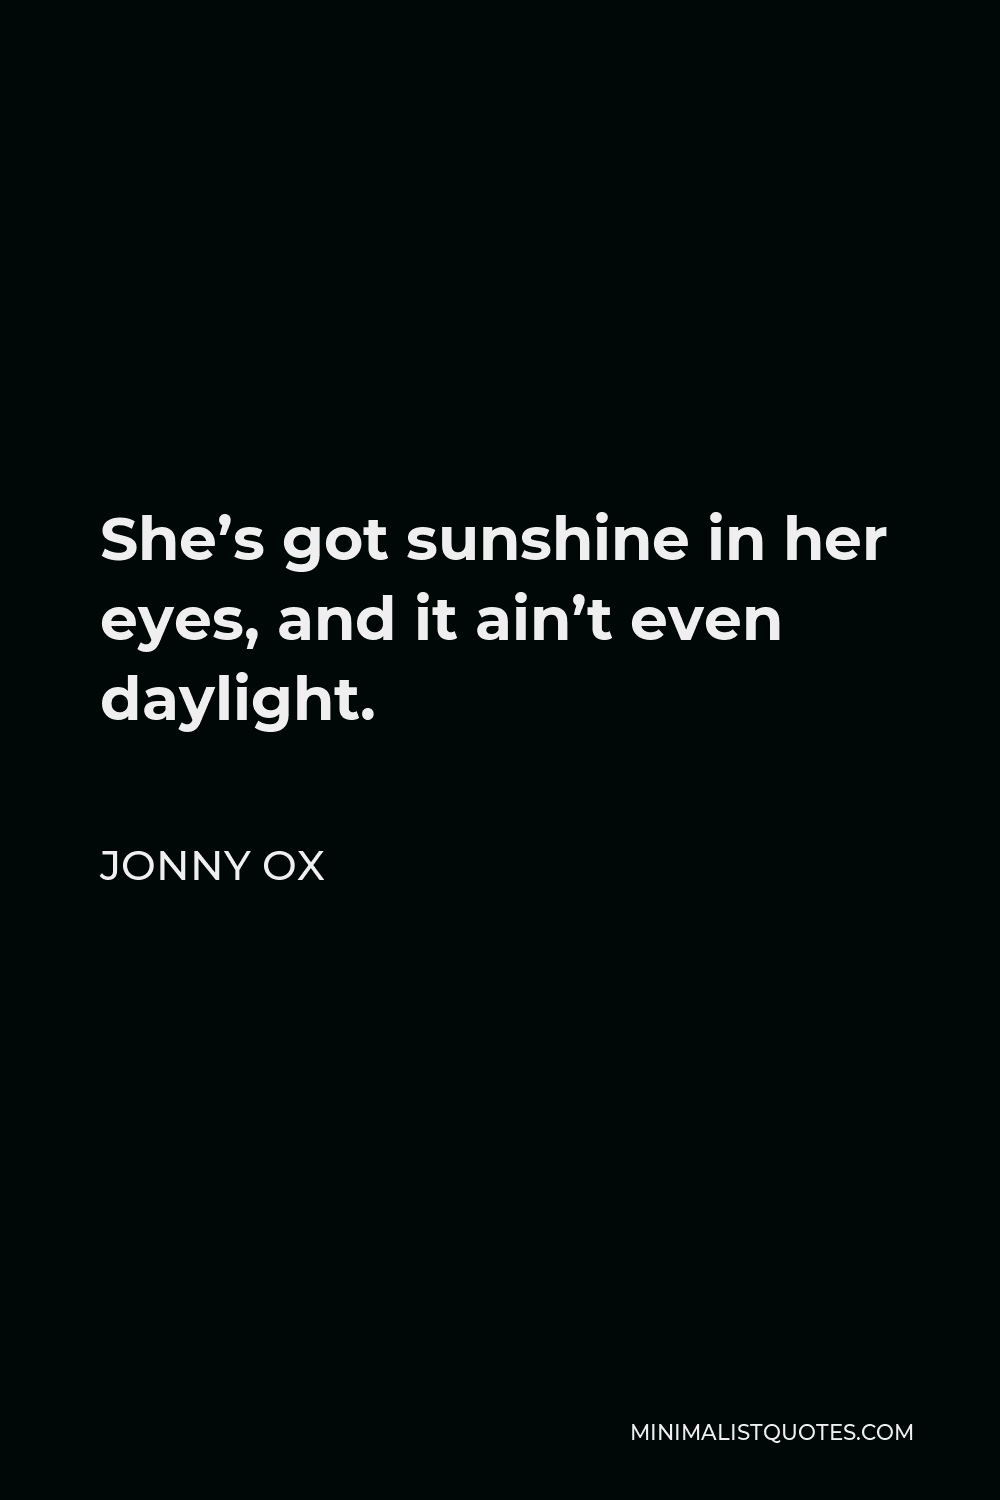 Jonny Ox Quote - She’s got sunshine in her eyes, and it ain’t even daylight.